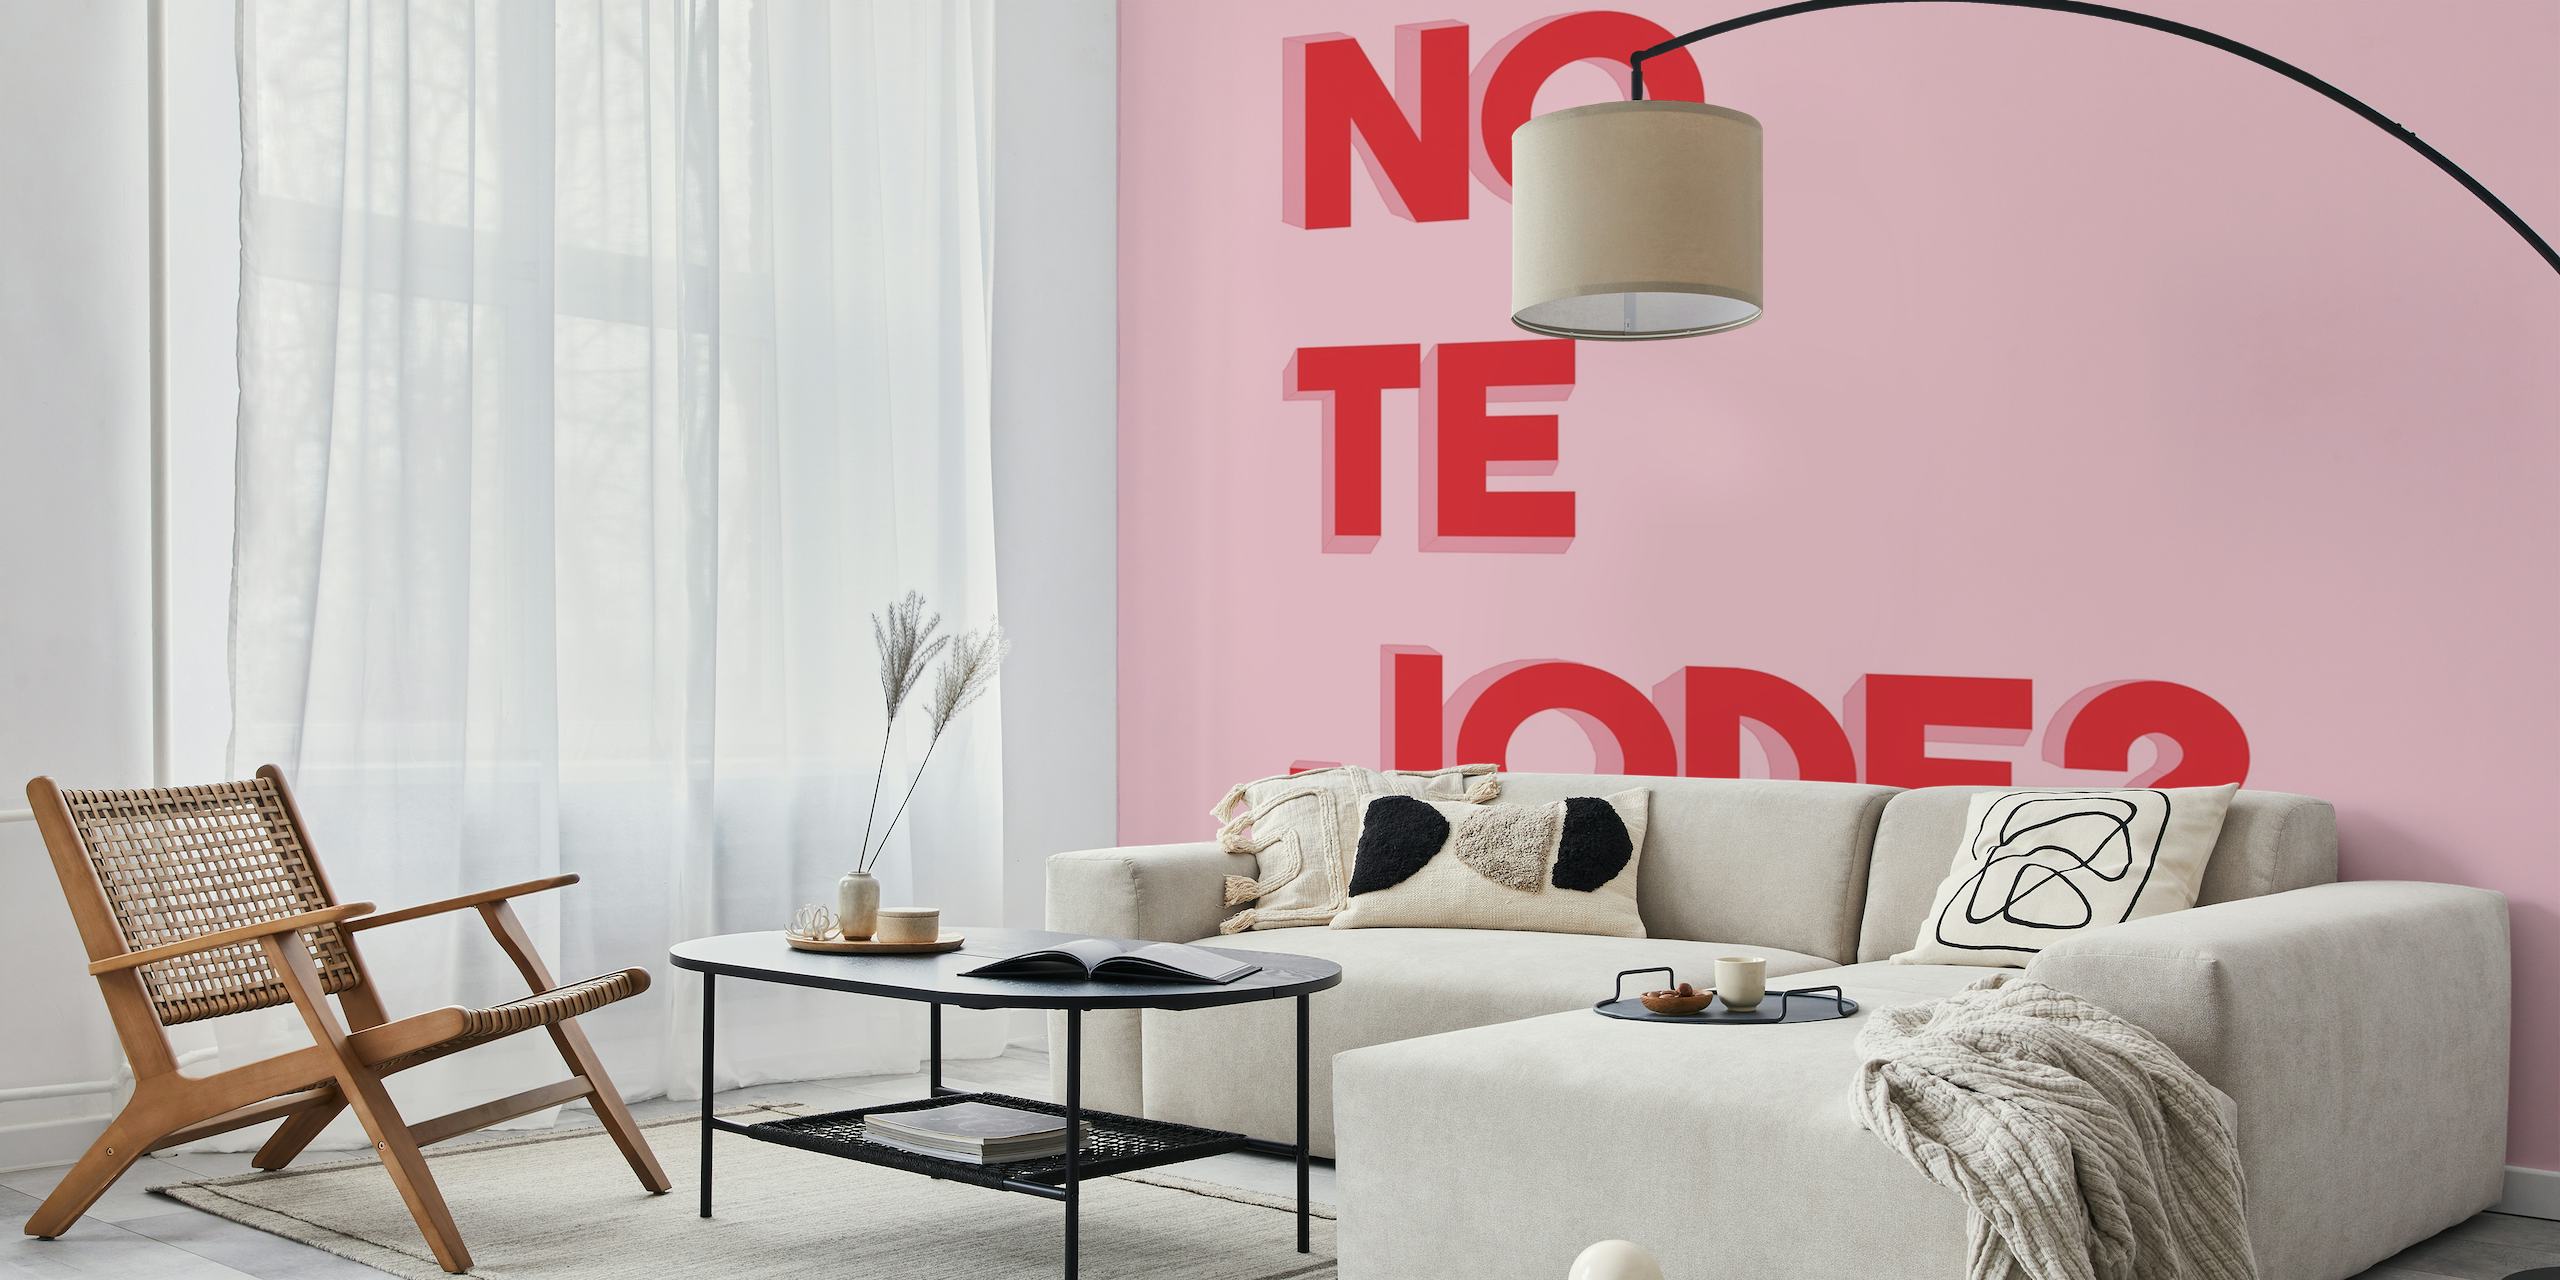 Bold red text 'No te jode?' on a pink background wall mural